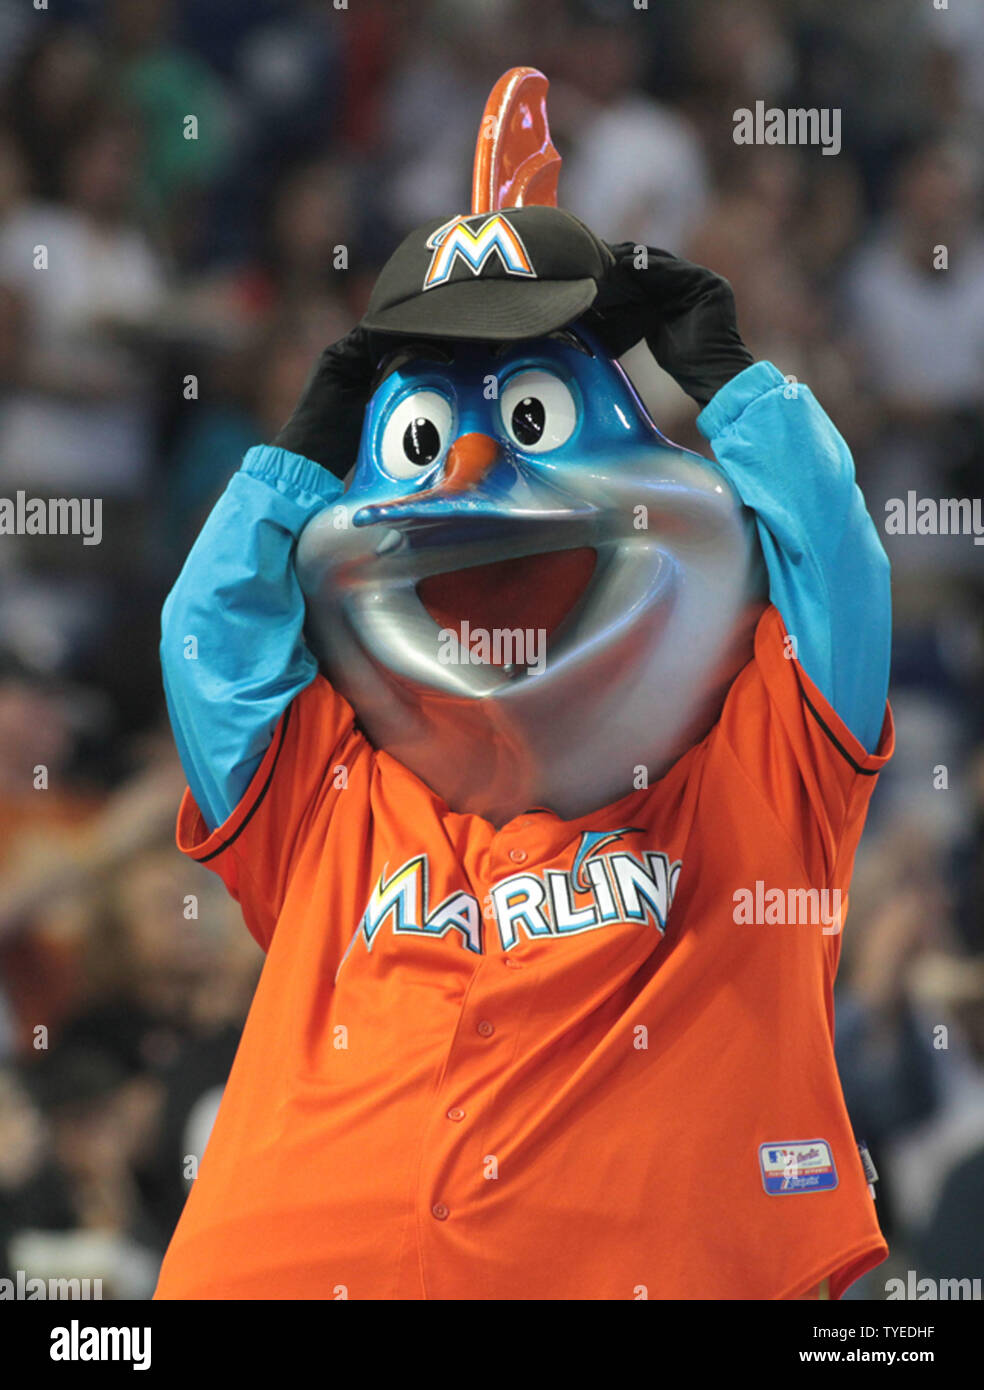 Miami Marlins Mascot Billy the Marlin celebrates on the dugout after the  2nd inning against the New York Yankees in their first exhibition game at  the new Marlins Ball Park April 1